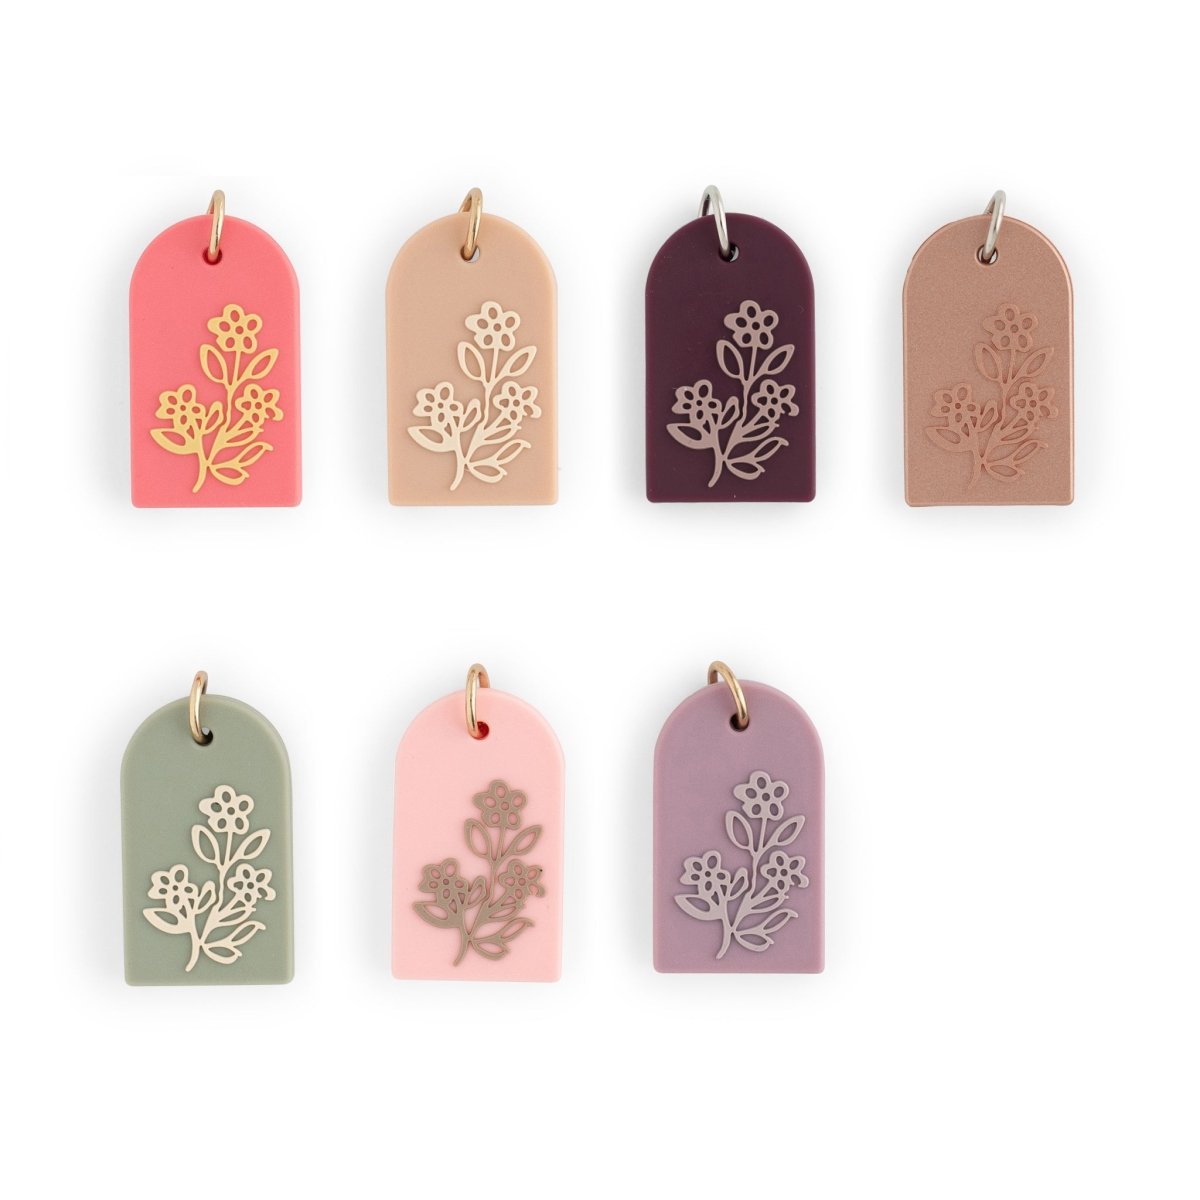 Silicone Charms Floral Arches Starburst from Cara & Co Craft Supply